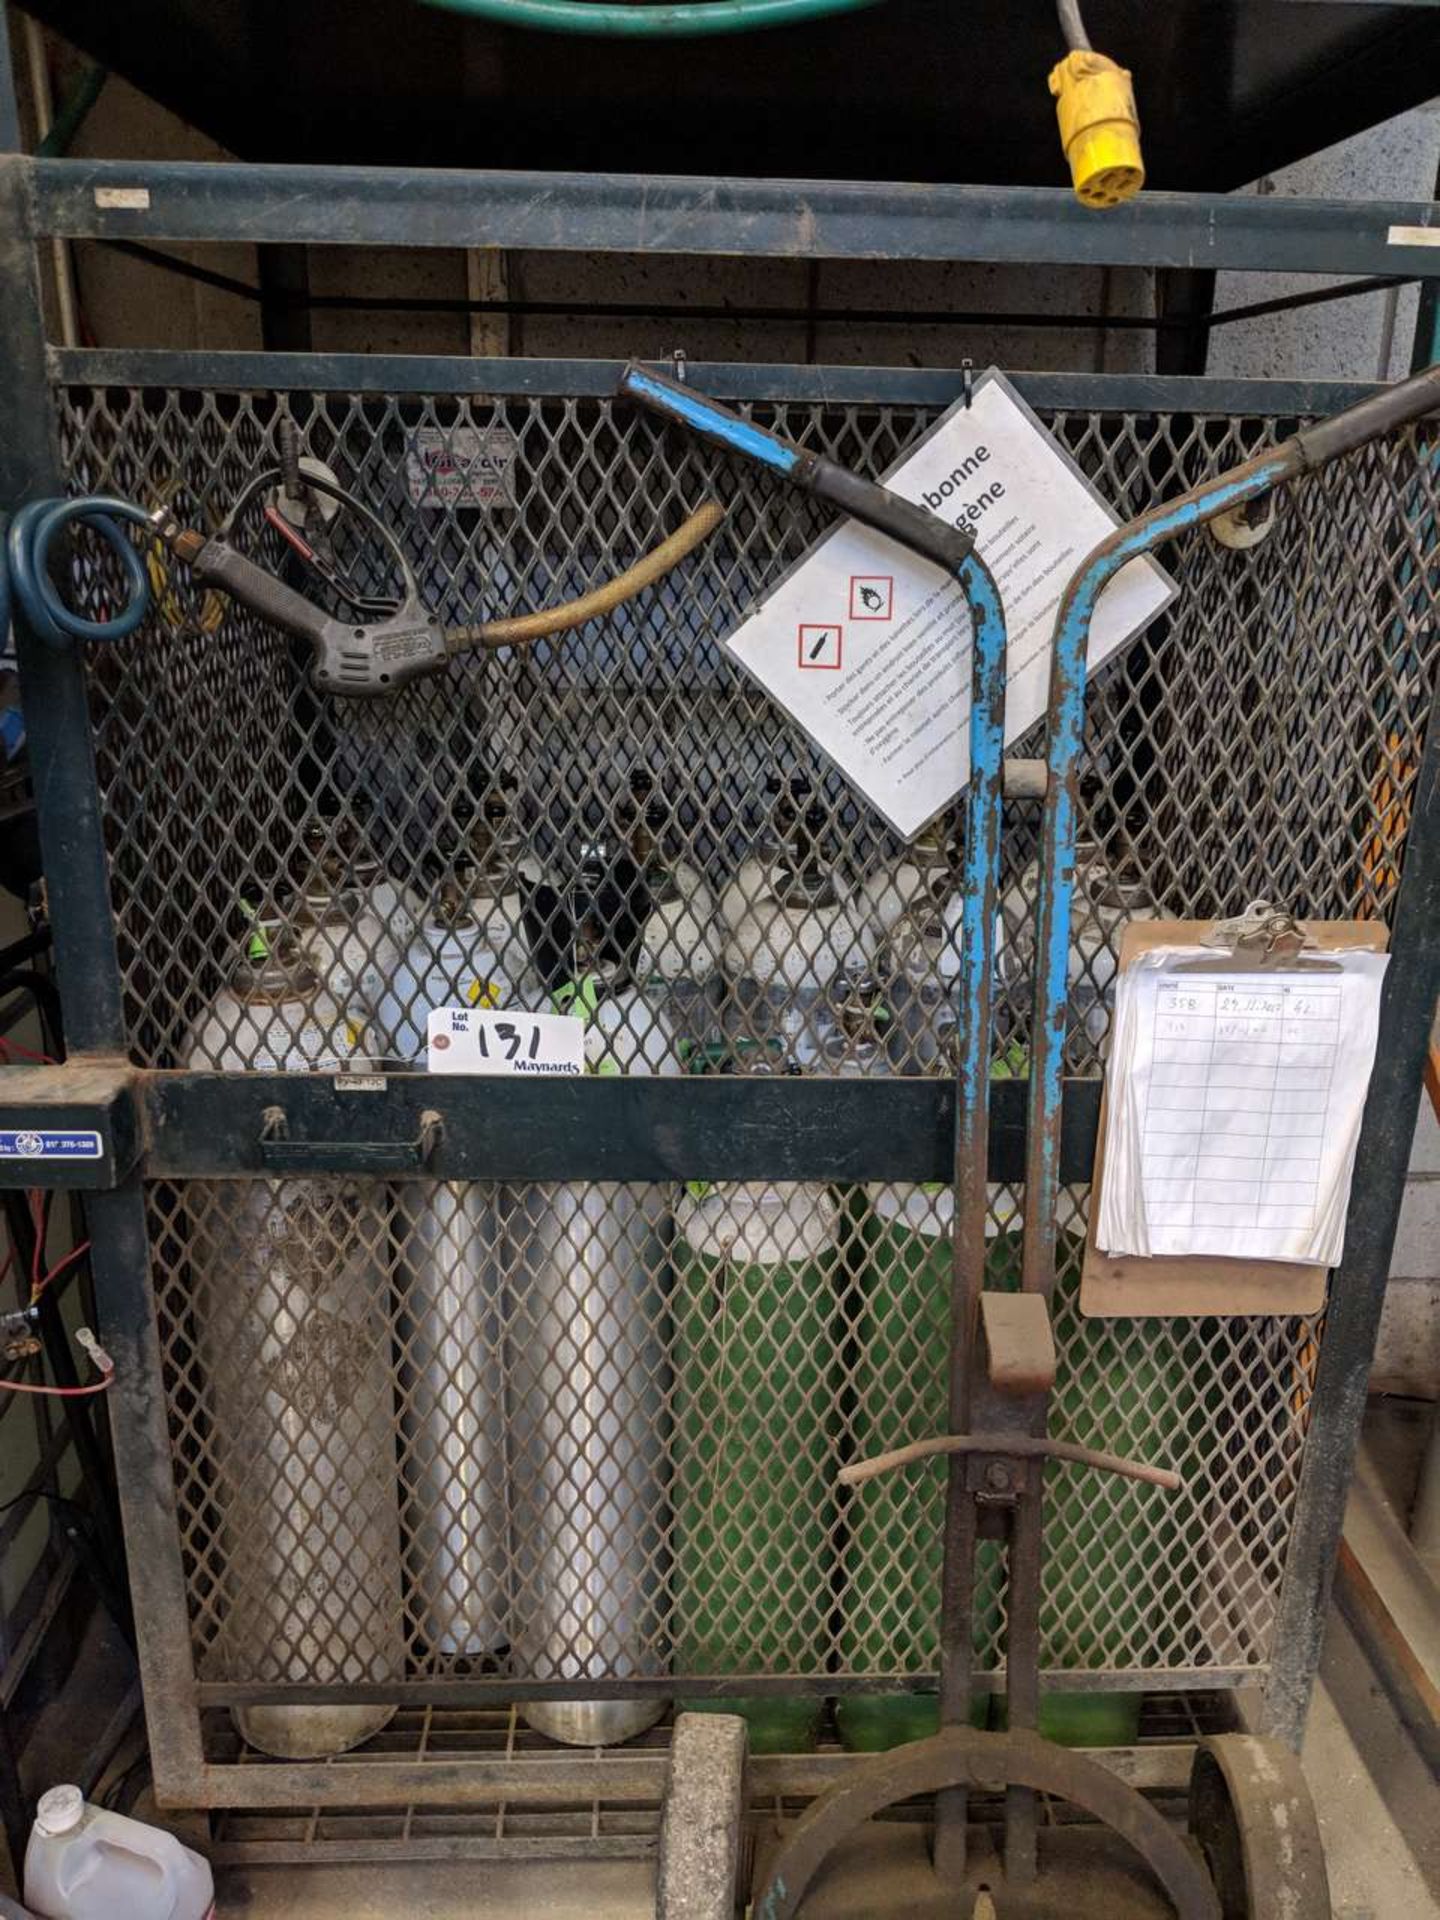 OXYGEN STORAGE CAGE W/ 29 CANISTERS